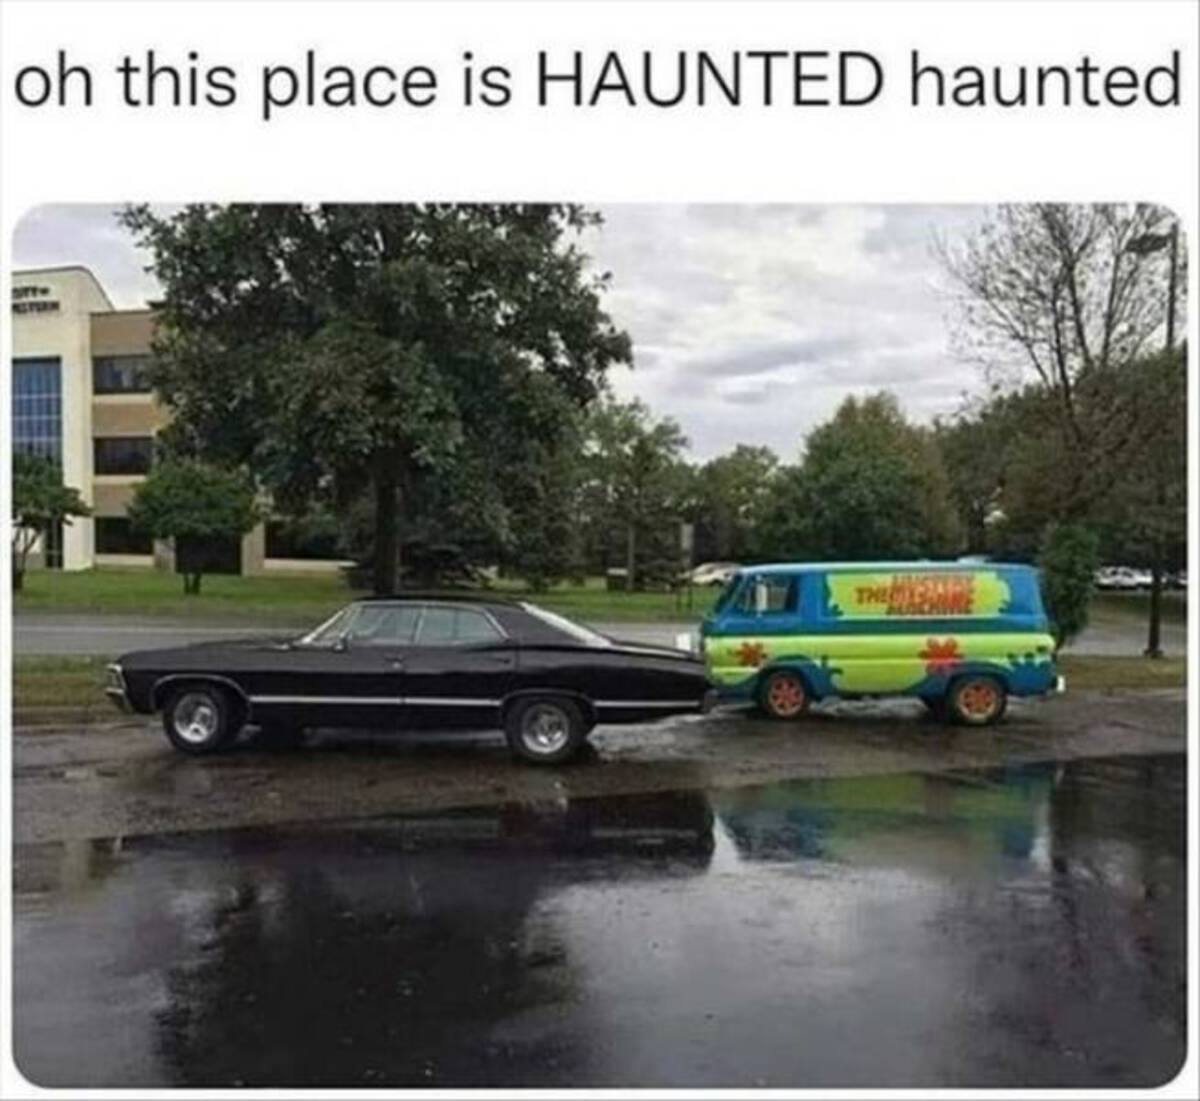 supernatural and scooby doo meme - oh this place is Haunted haunted They Ca